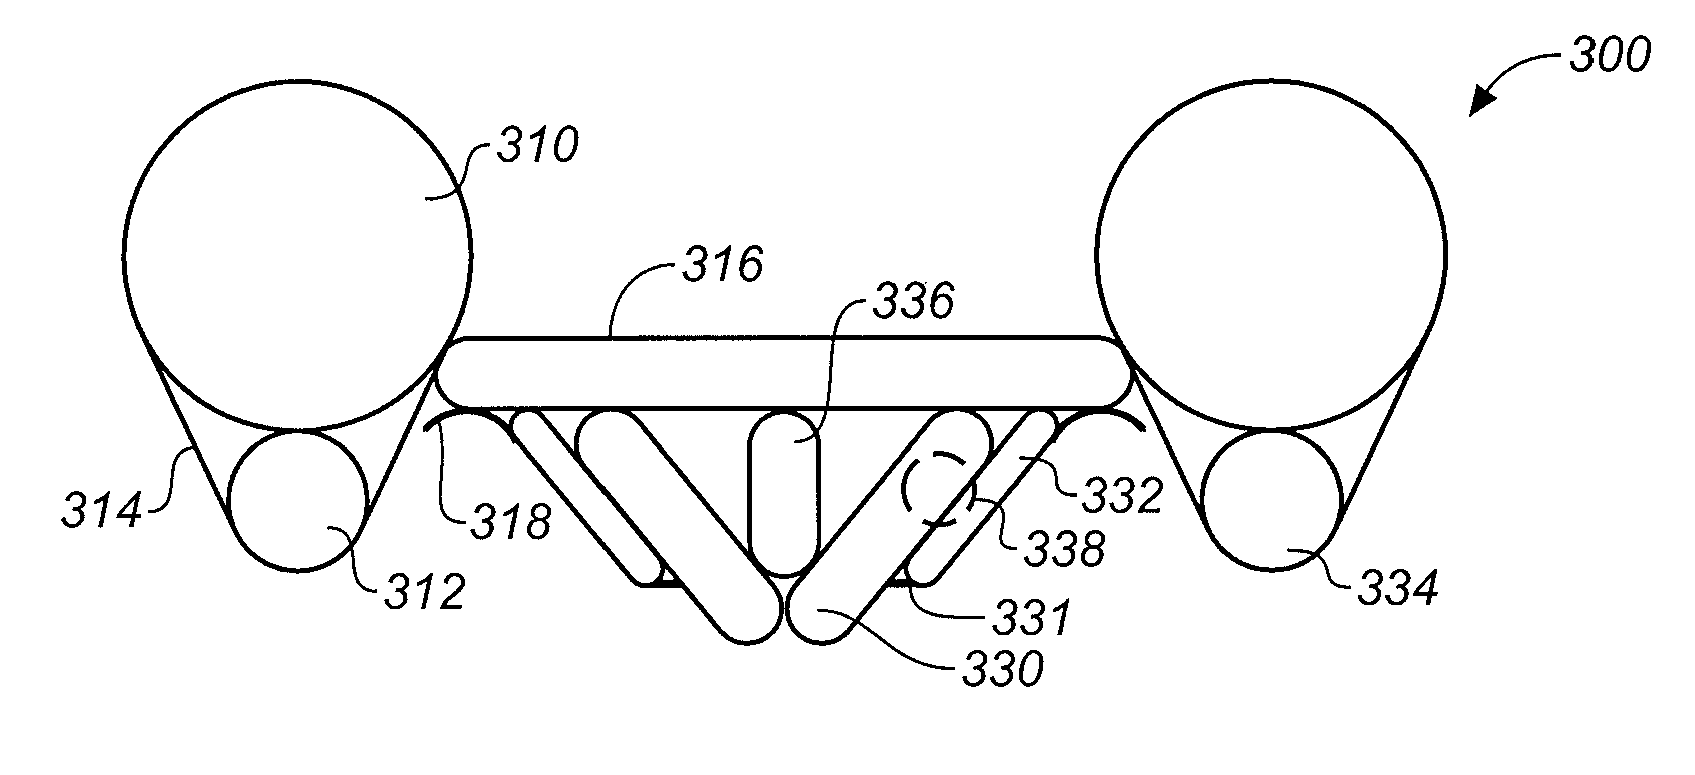 Inflatable watercraft with reinforced panels